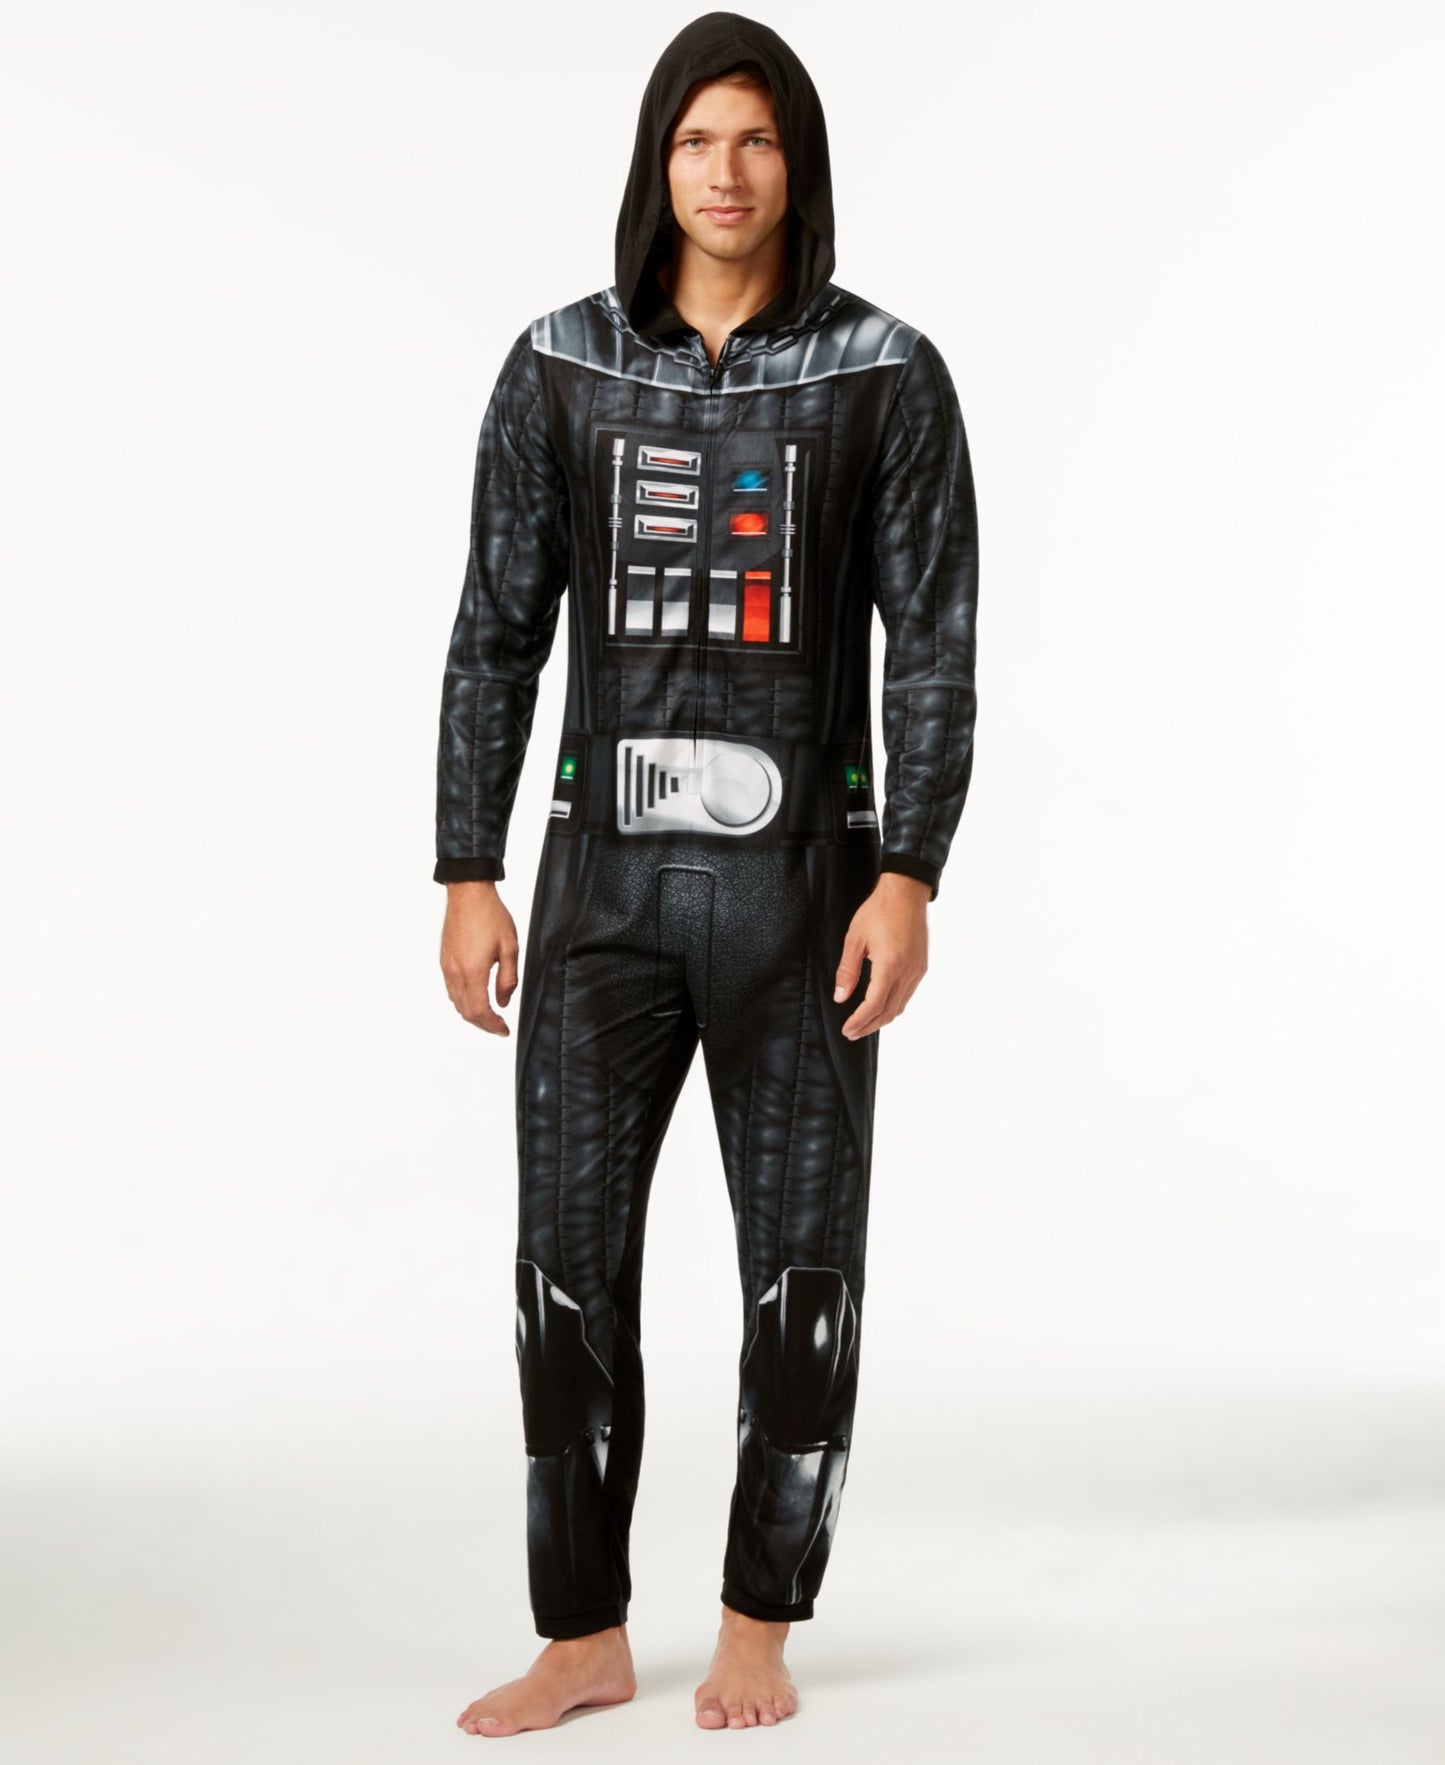 Briefly Stated Darth Vader Adult Union Suit